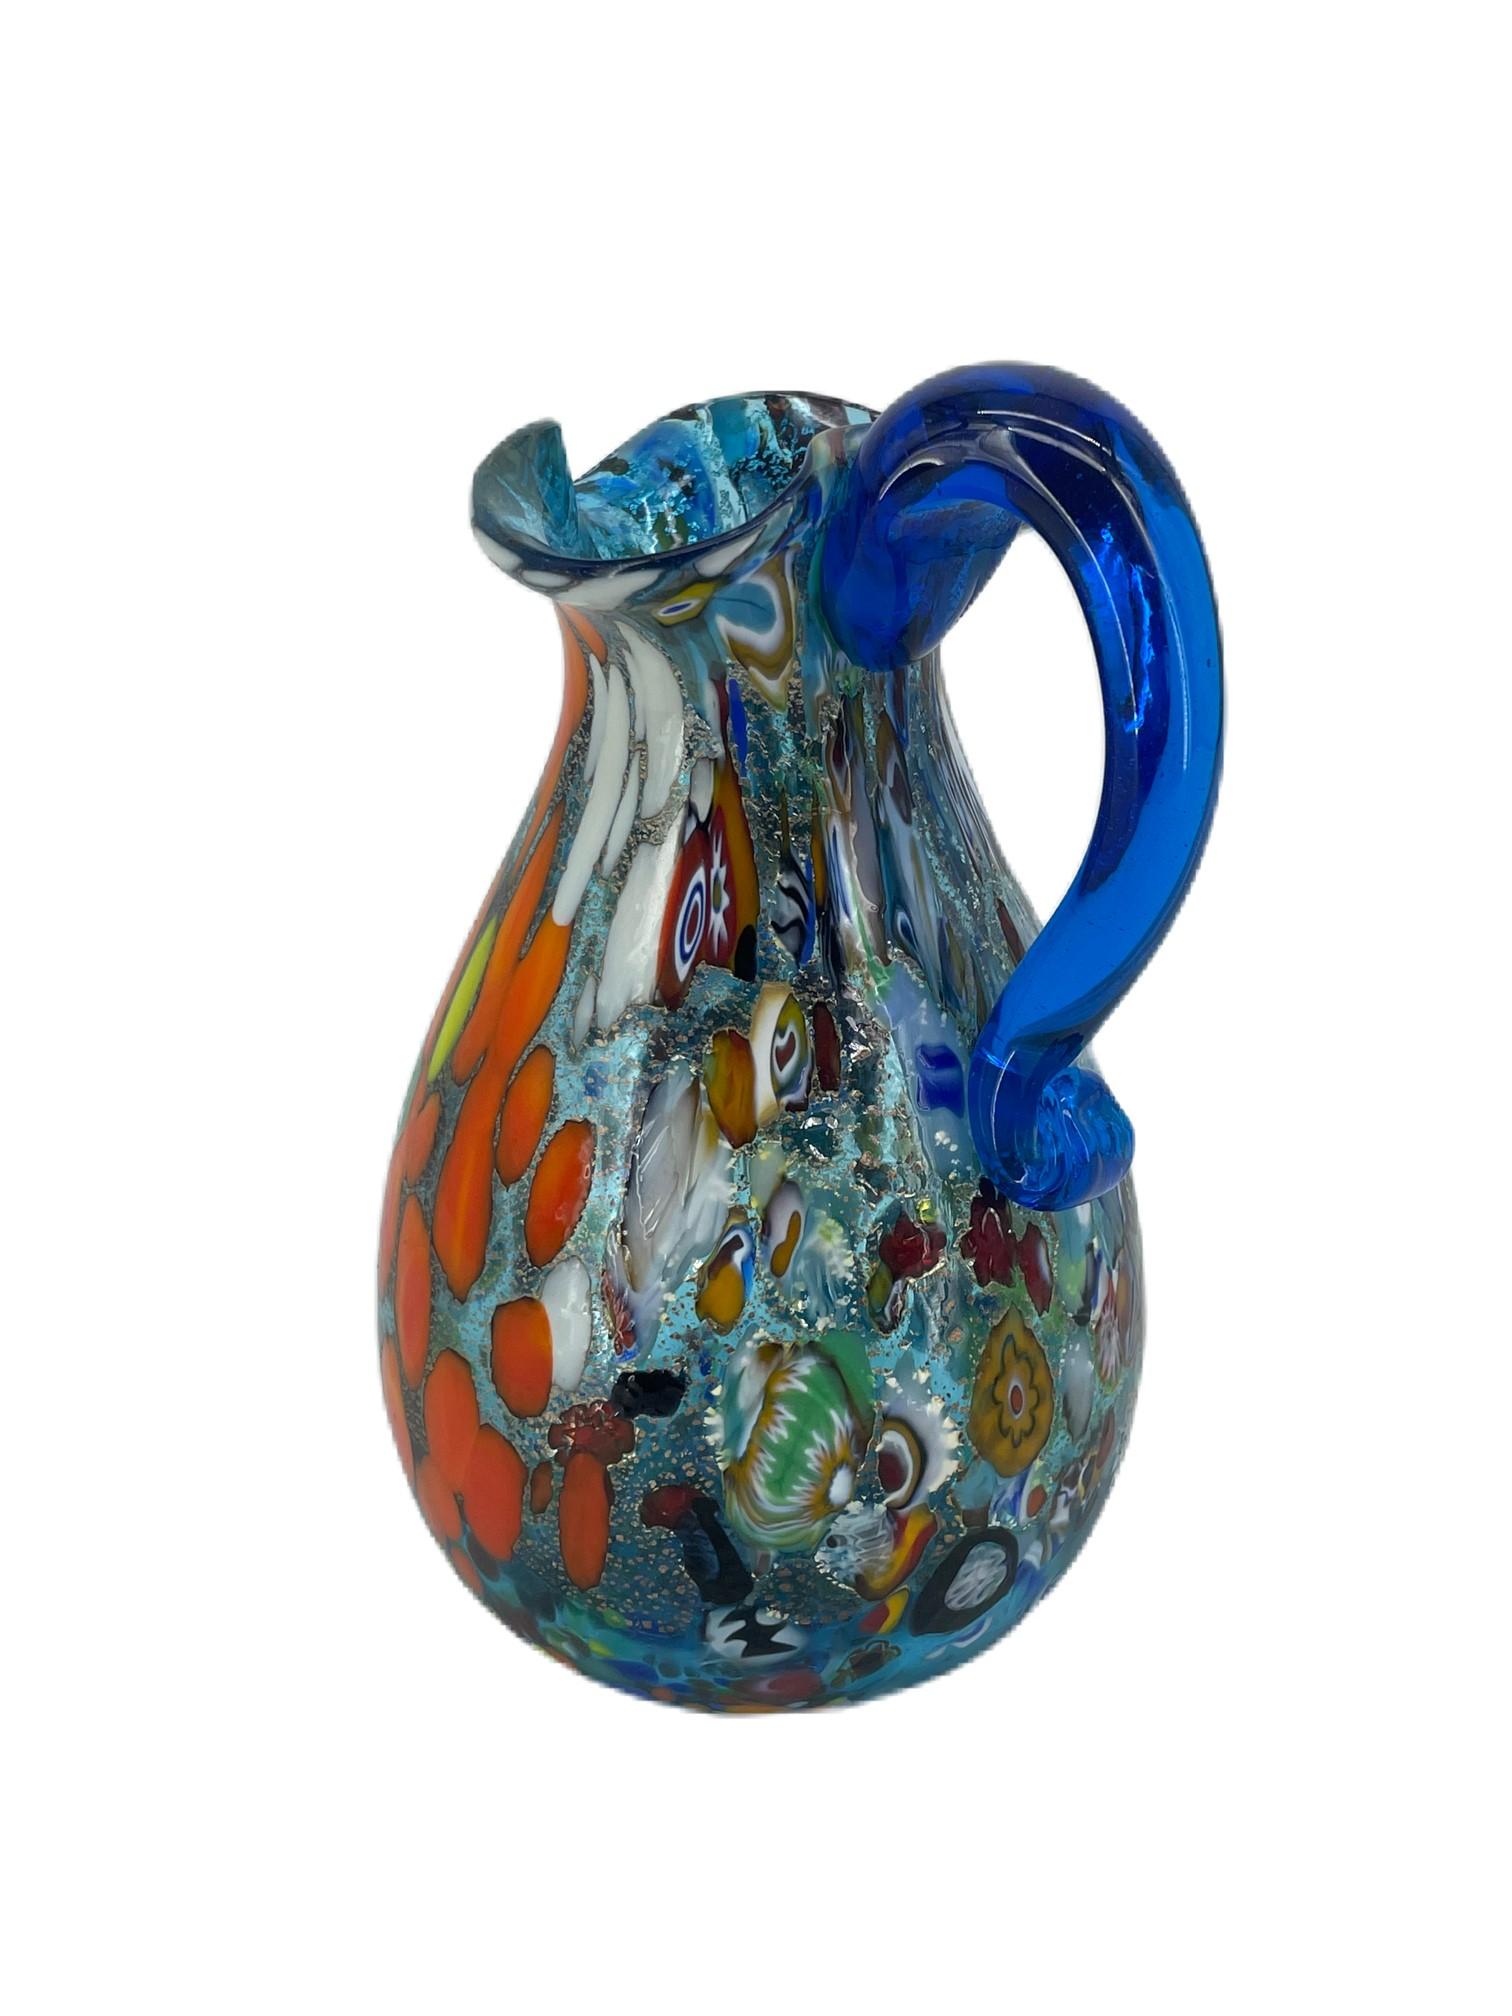 Pitcher from the ‘Fantasy’ Collection in aquamarine Murano blown glass with assorted multicolour “Mace” decoration, Murrina Millefiori and silver foil.
The vase has been hand-crafted by Murano master glassmaker Imperio Rossi.
Original Murano Vetro